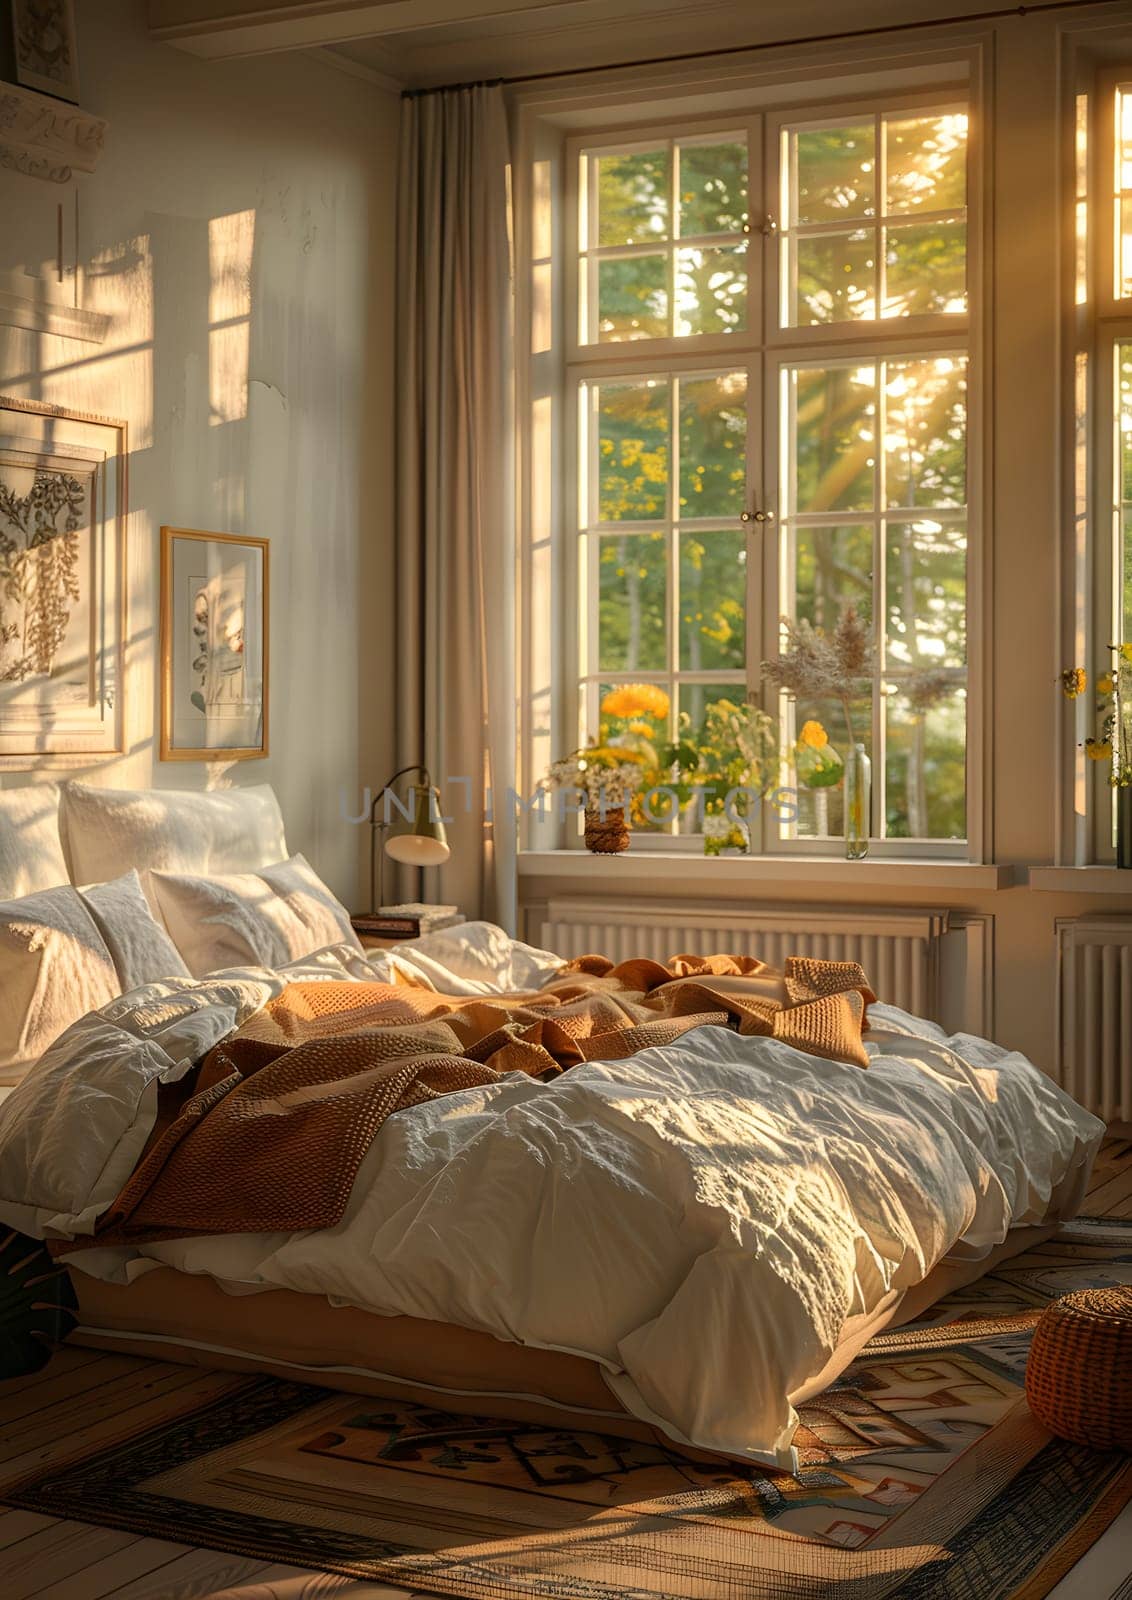 A bedroom with hardwood flooring, a bed, and a window letting in the suns rays by Nadtochiy